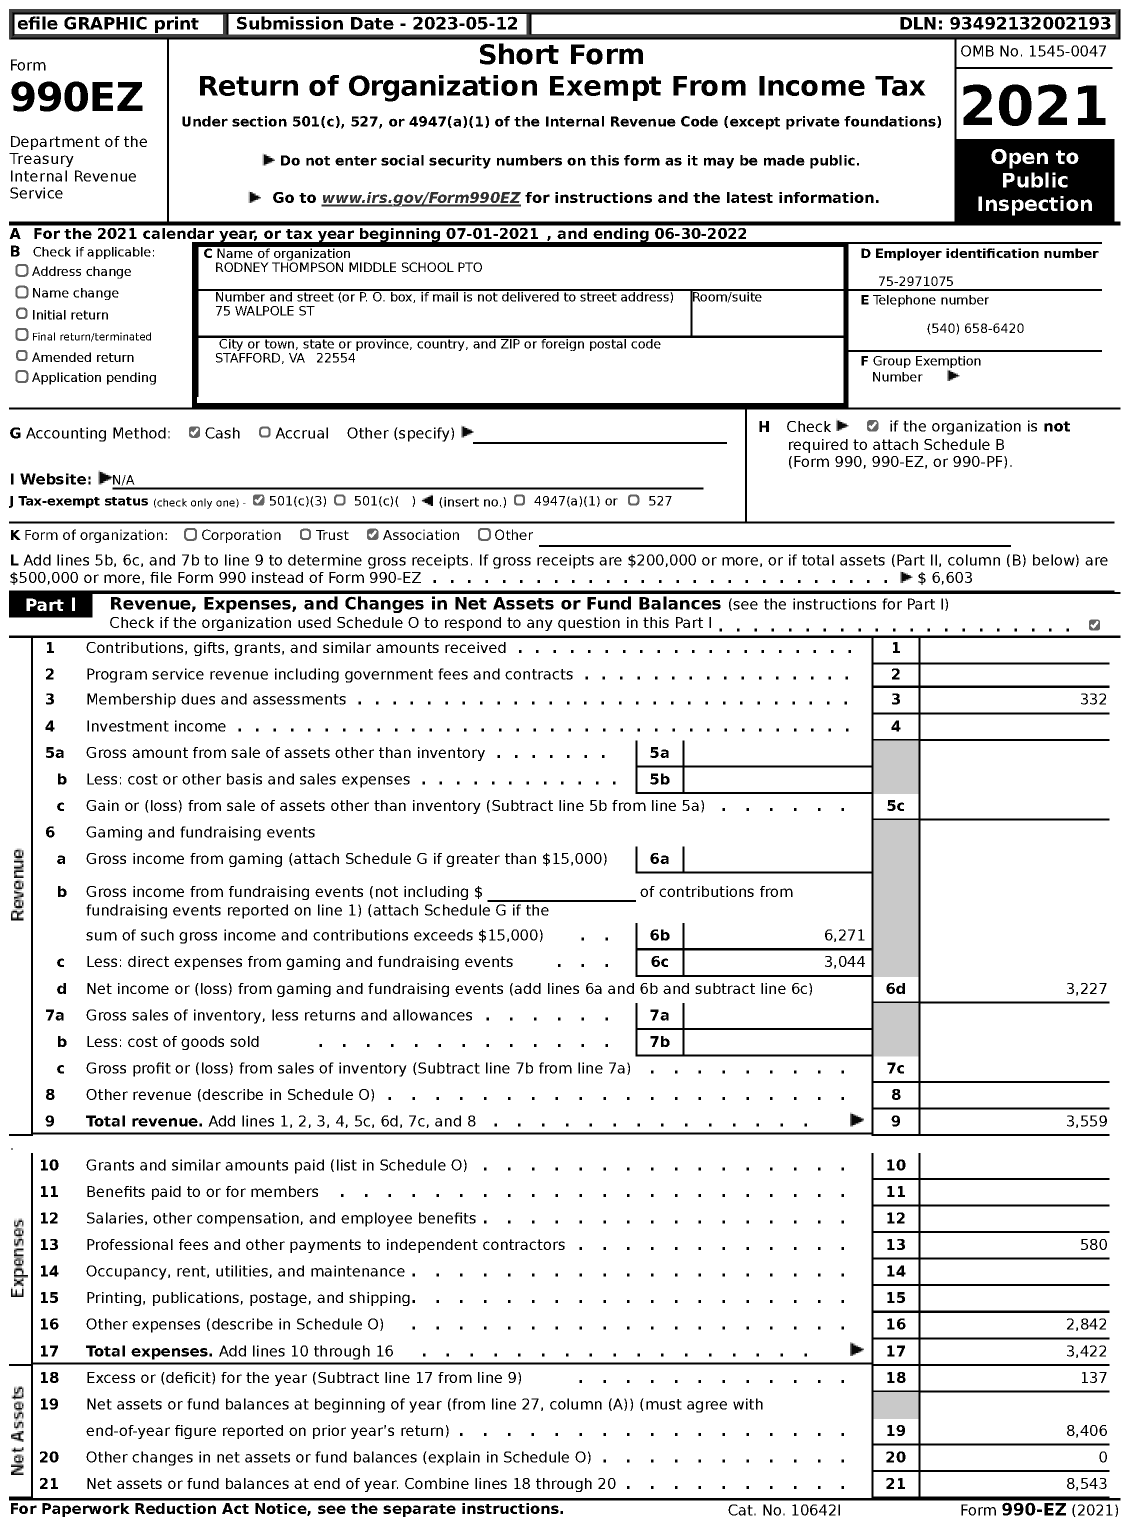 Image of first page of 2021 Form 990EZ for Rodney Thompson Middle School Pto